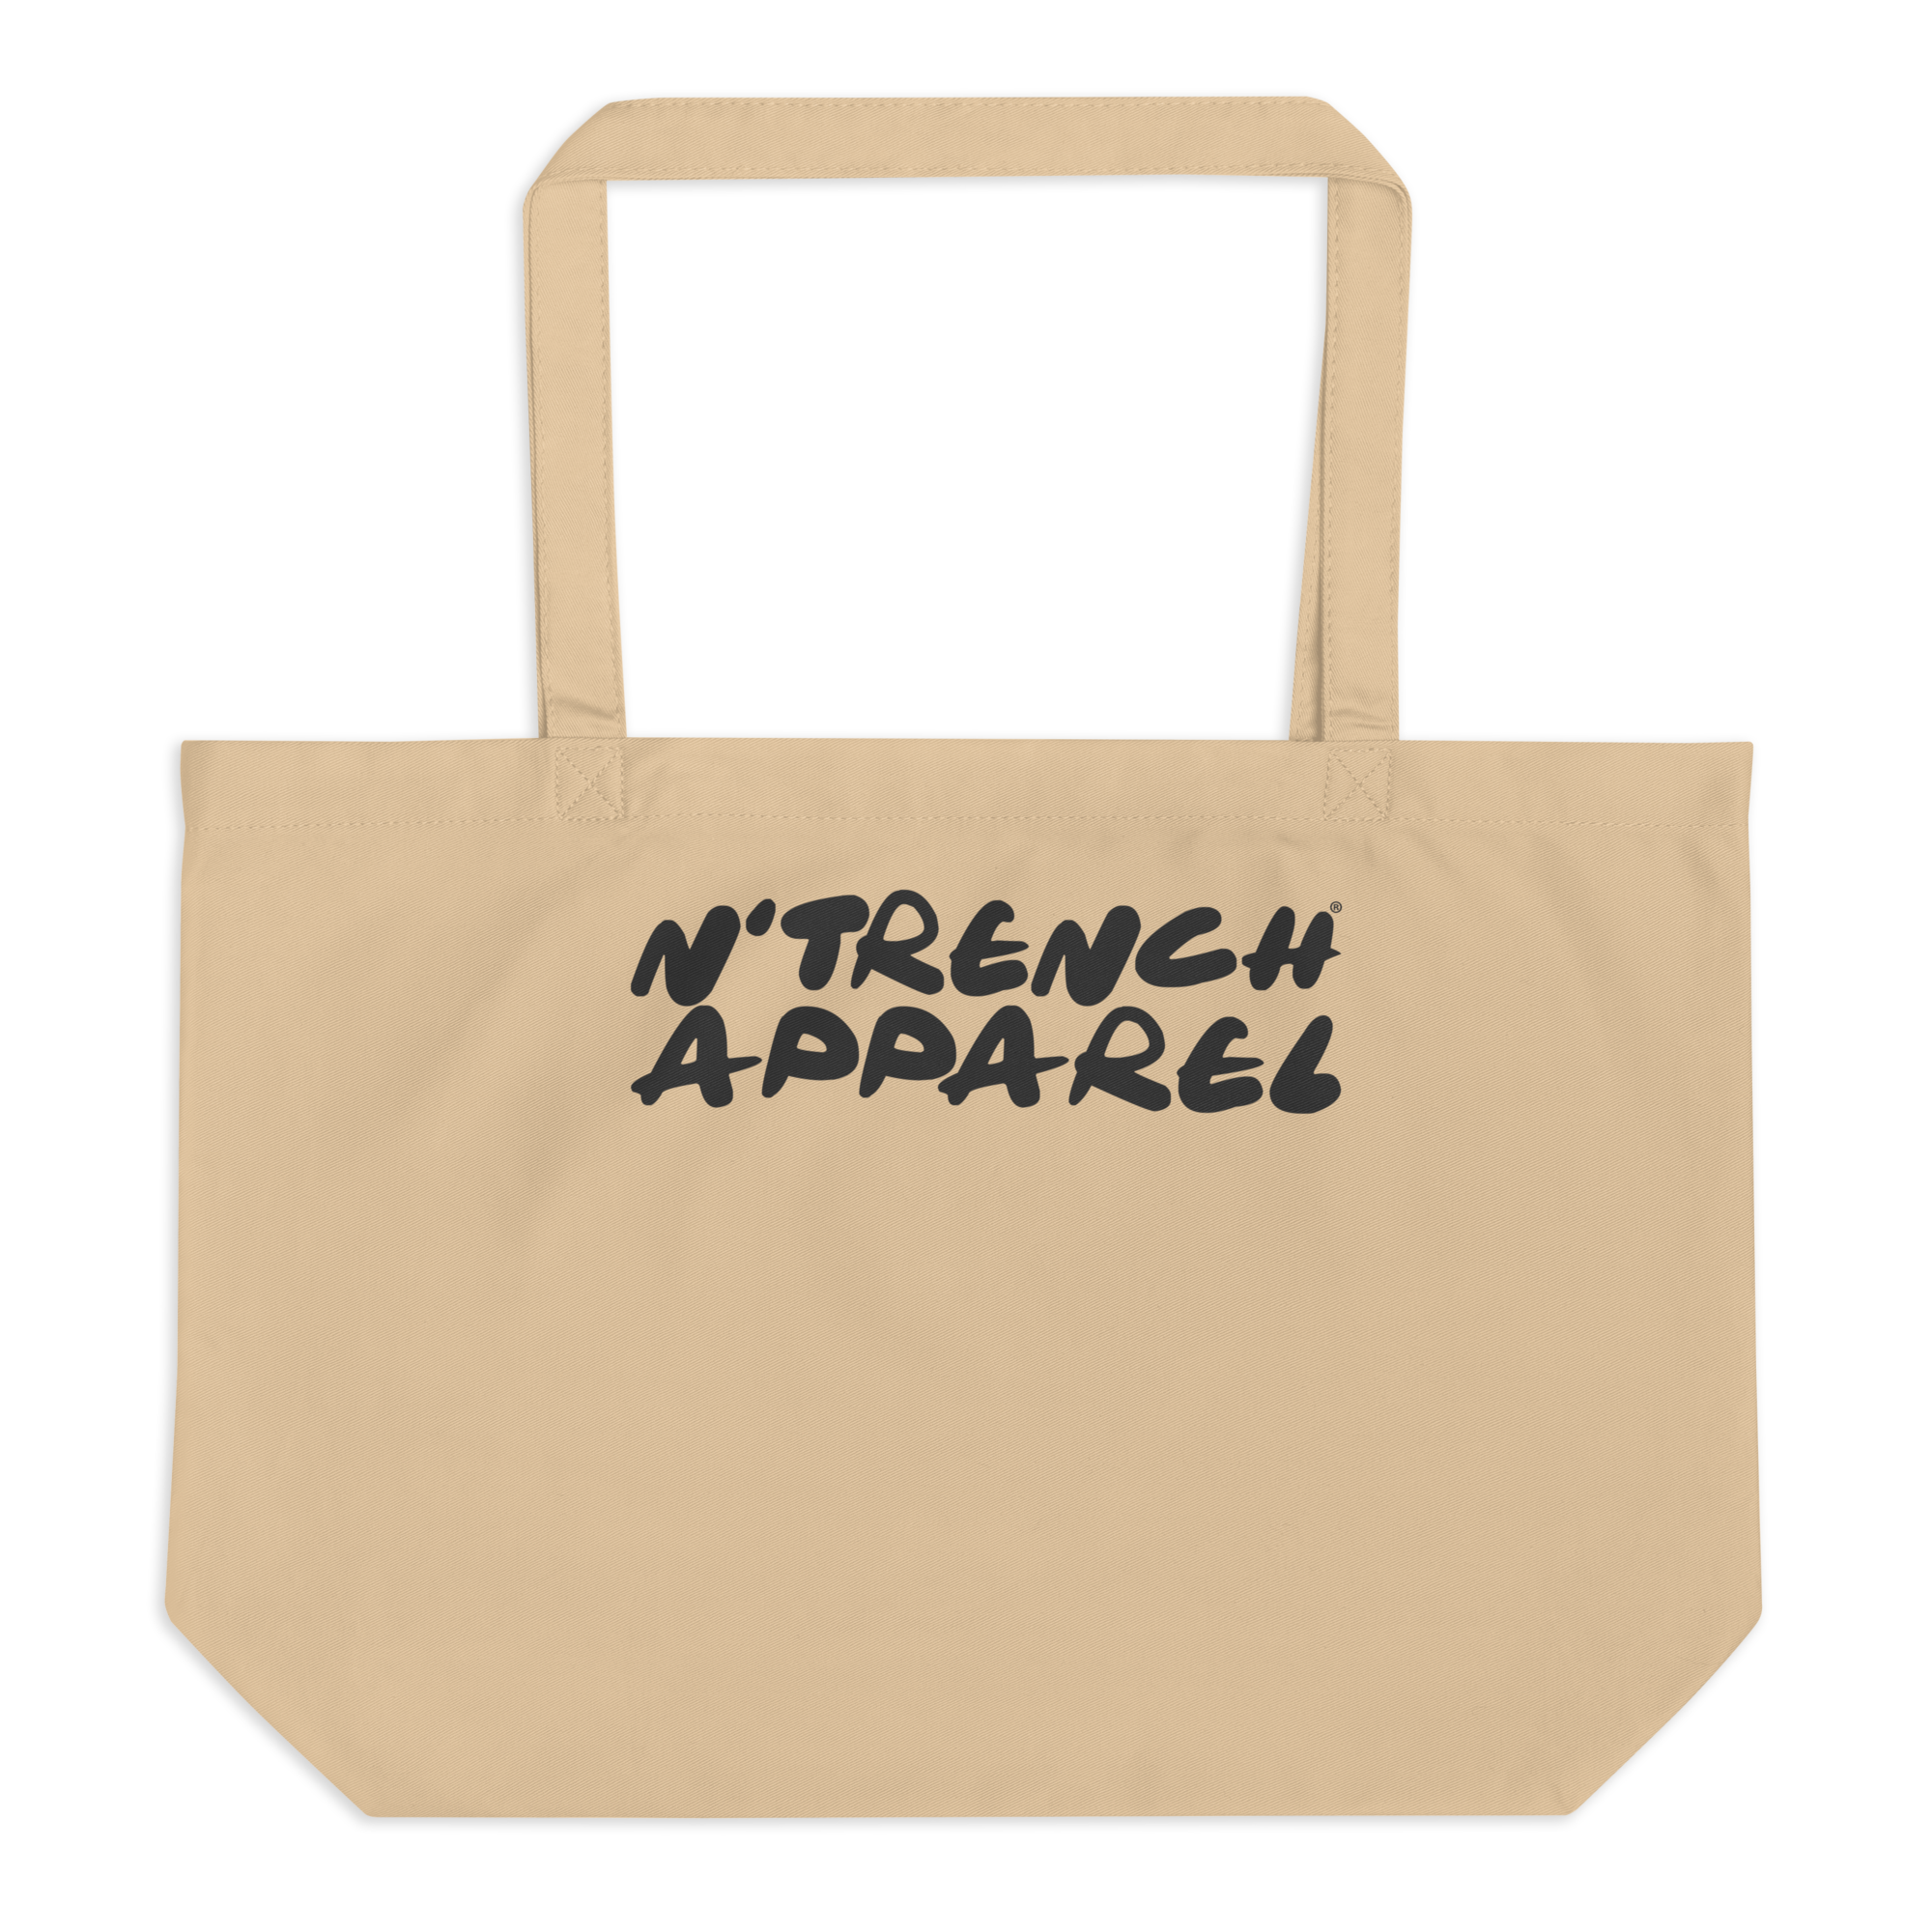 N'Trench Apparel Black Lettering Large organic tote bag